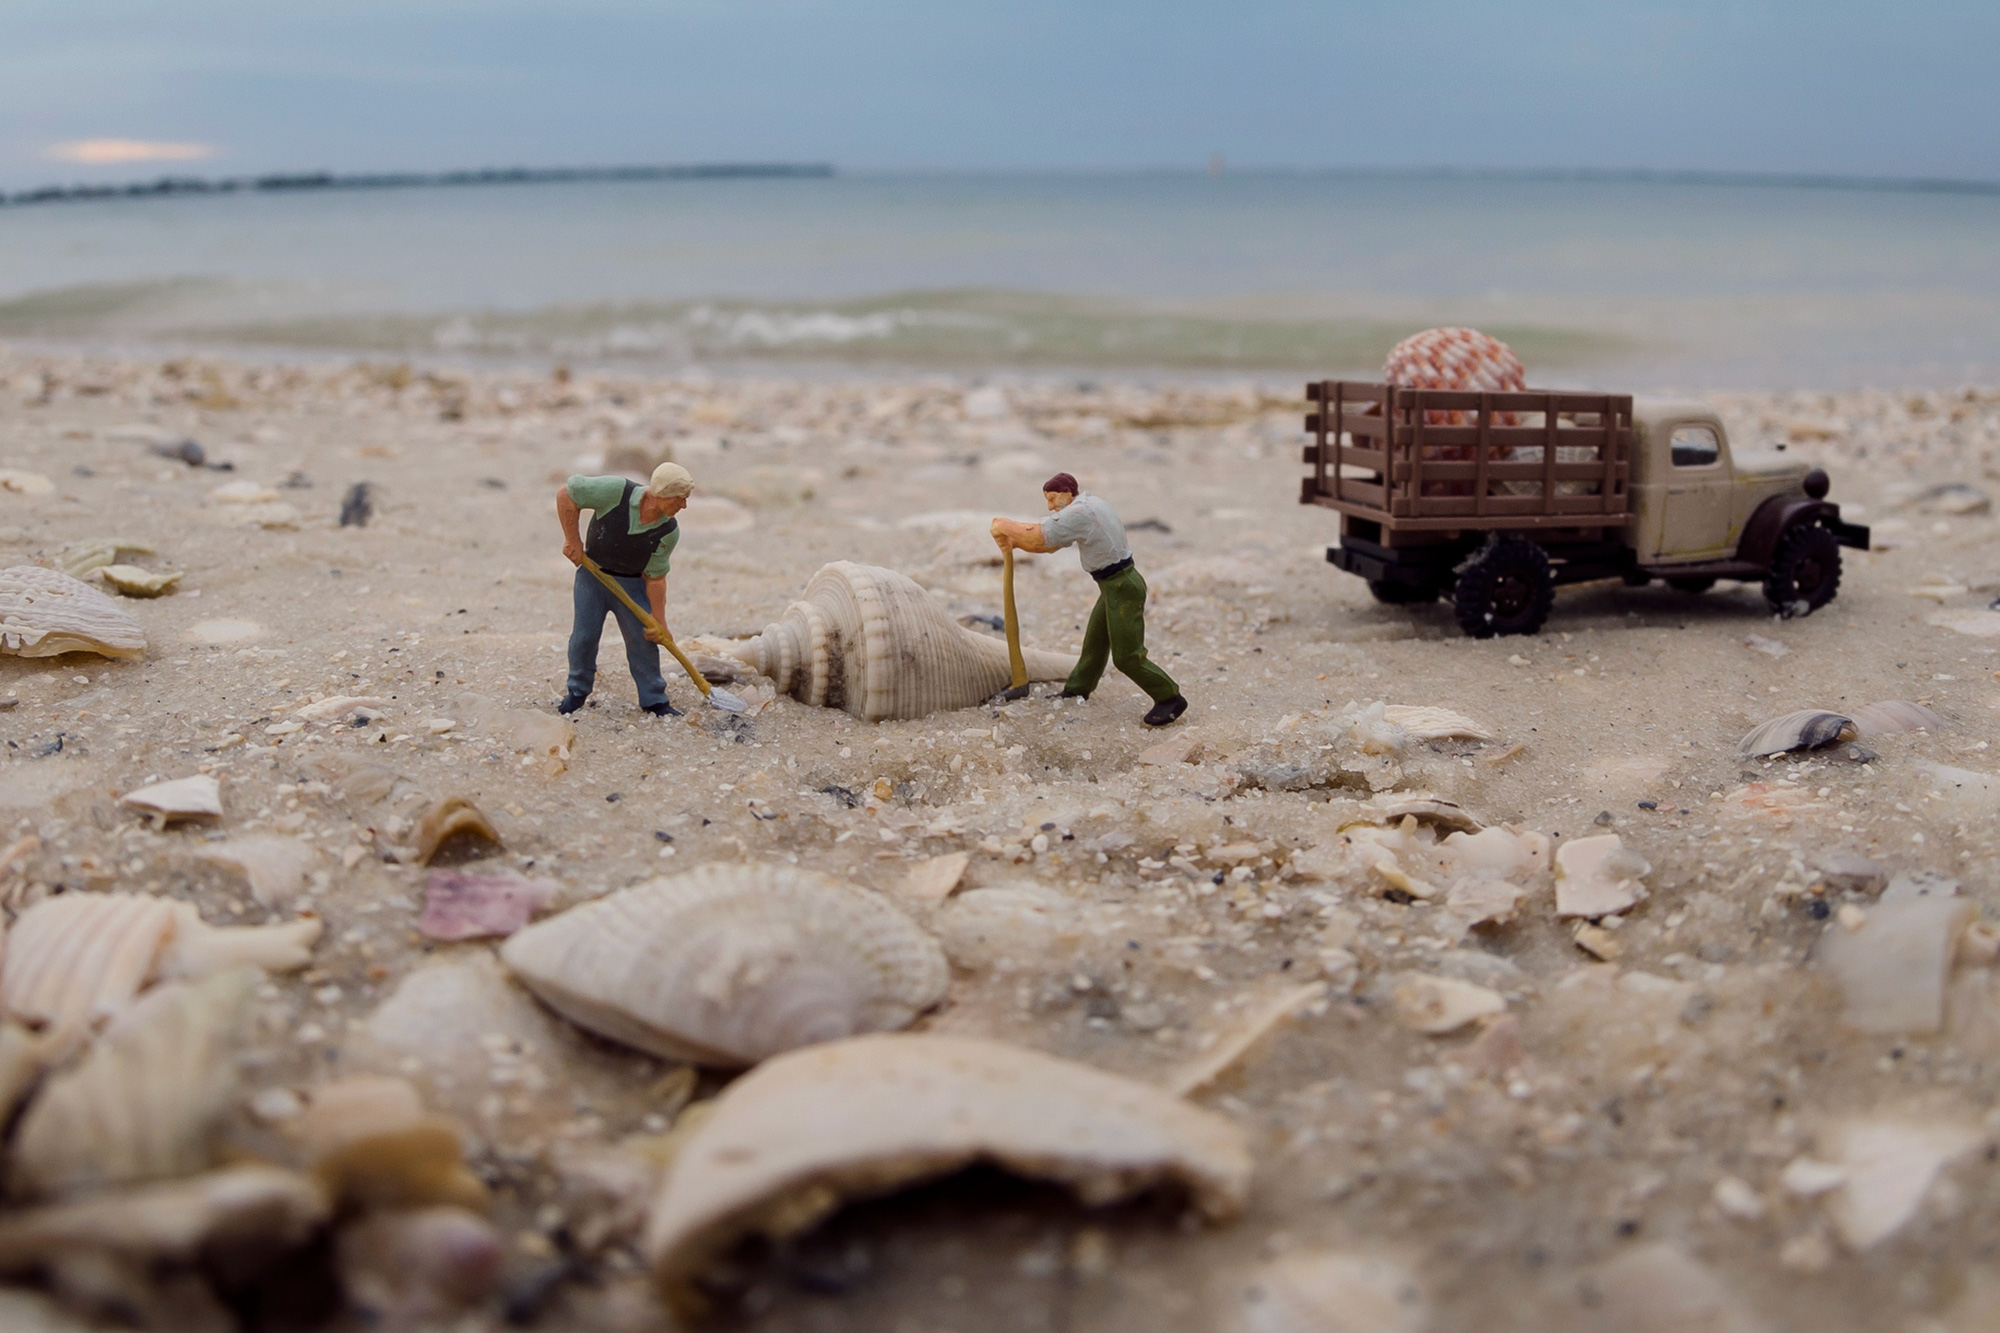 mini figures of men digging up a shell on the beach to put in a mini truck